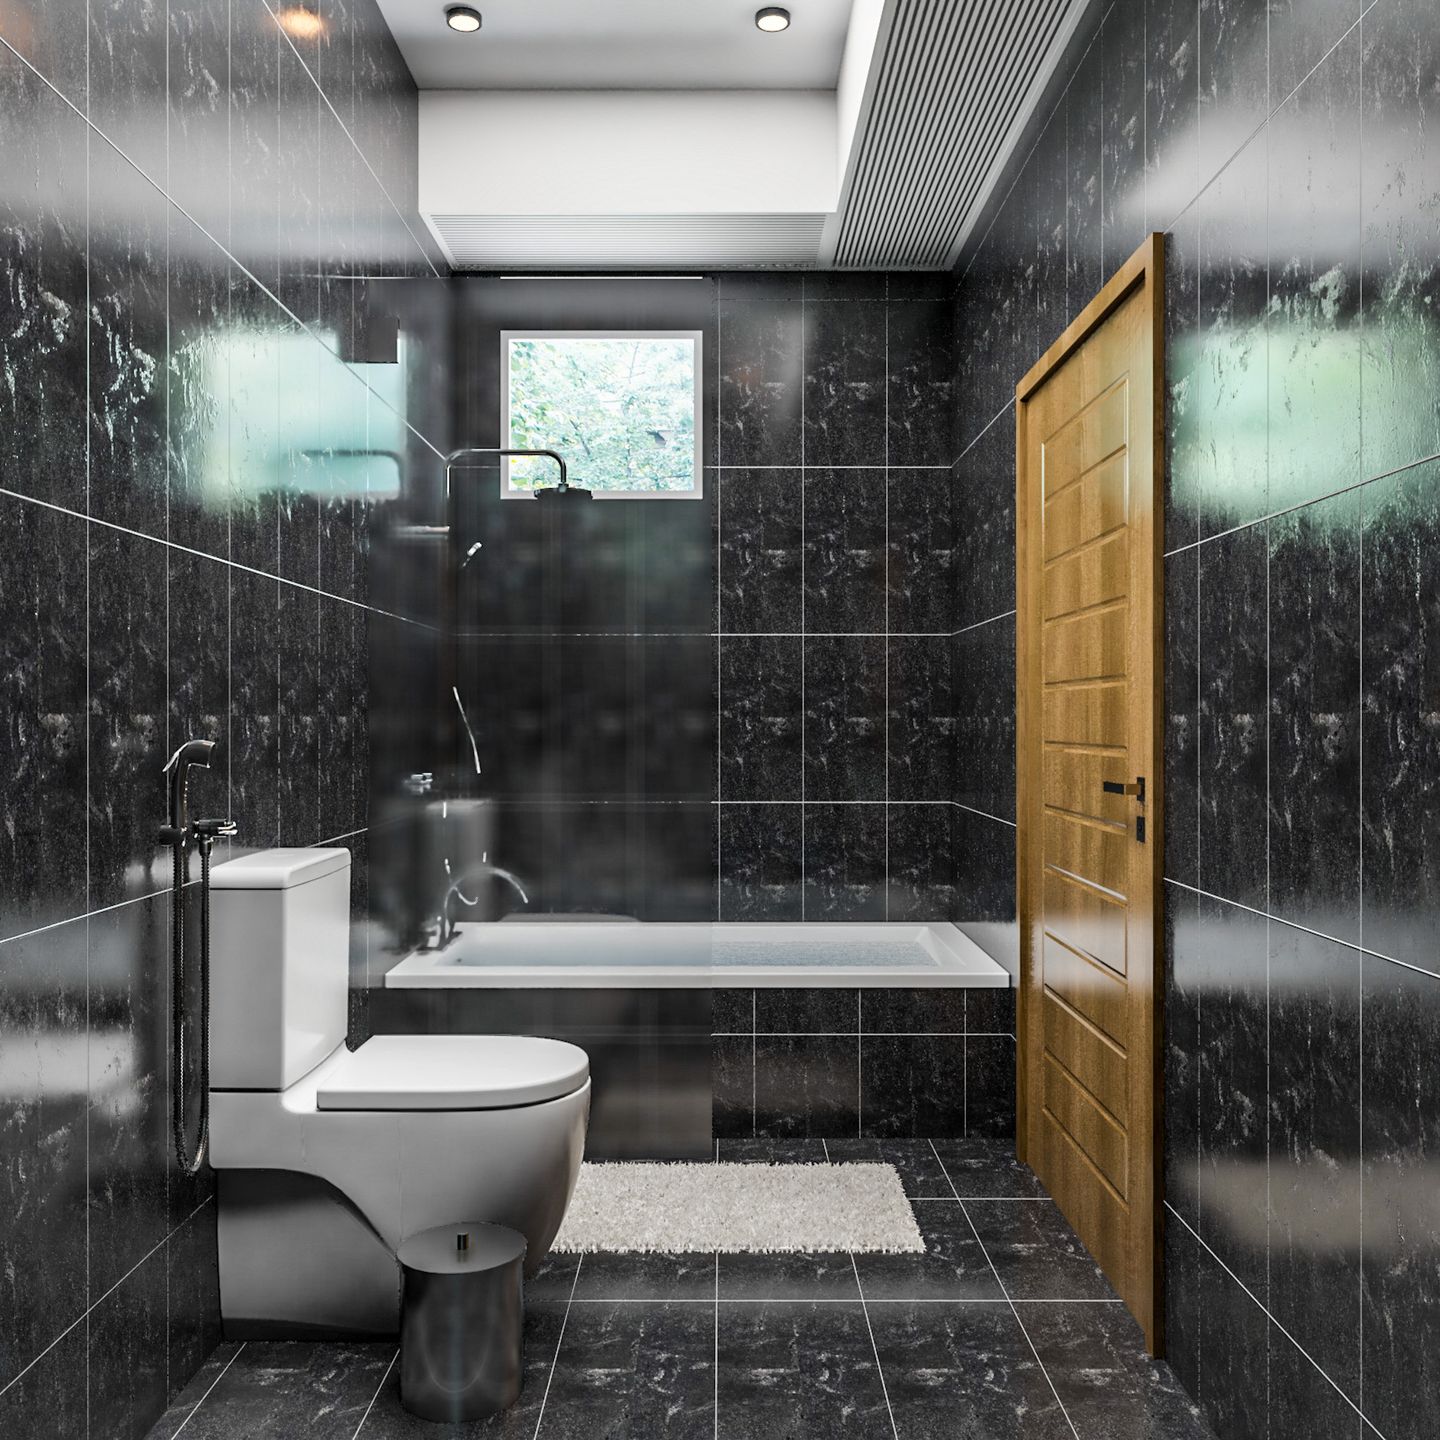 Bathroom Design With Black Wall And Floor Tiles And A White Bathtub - Livspace